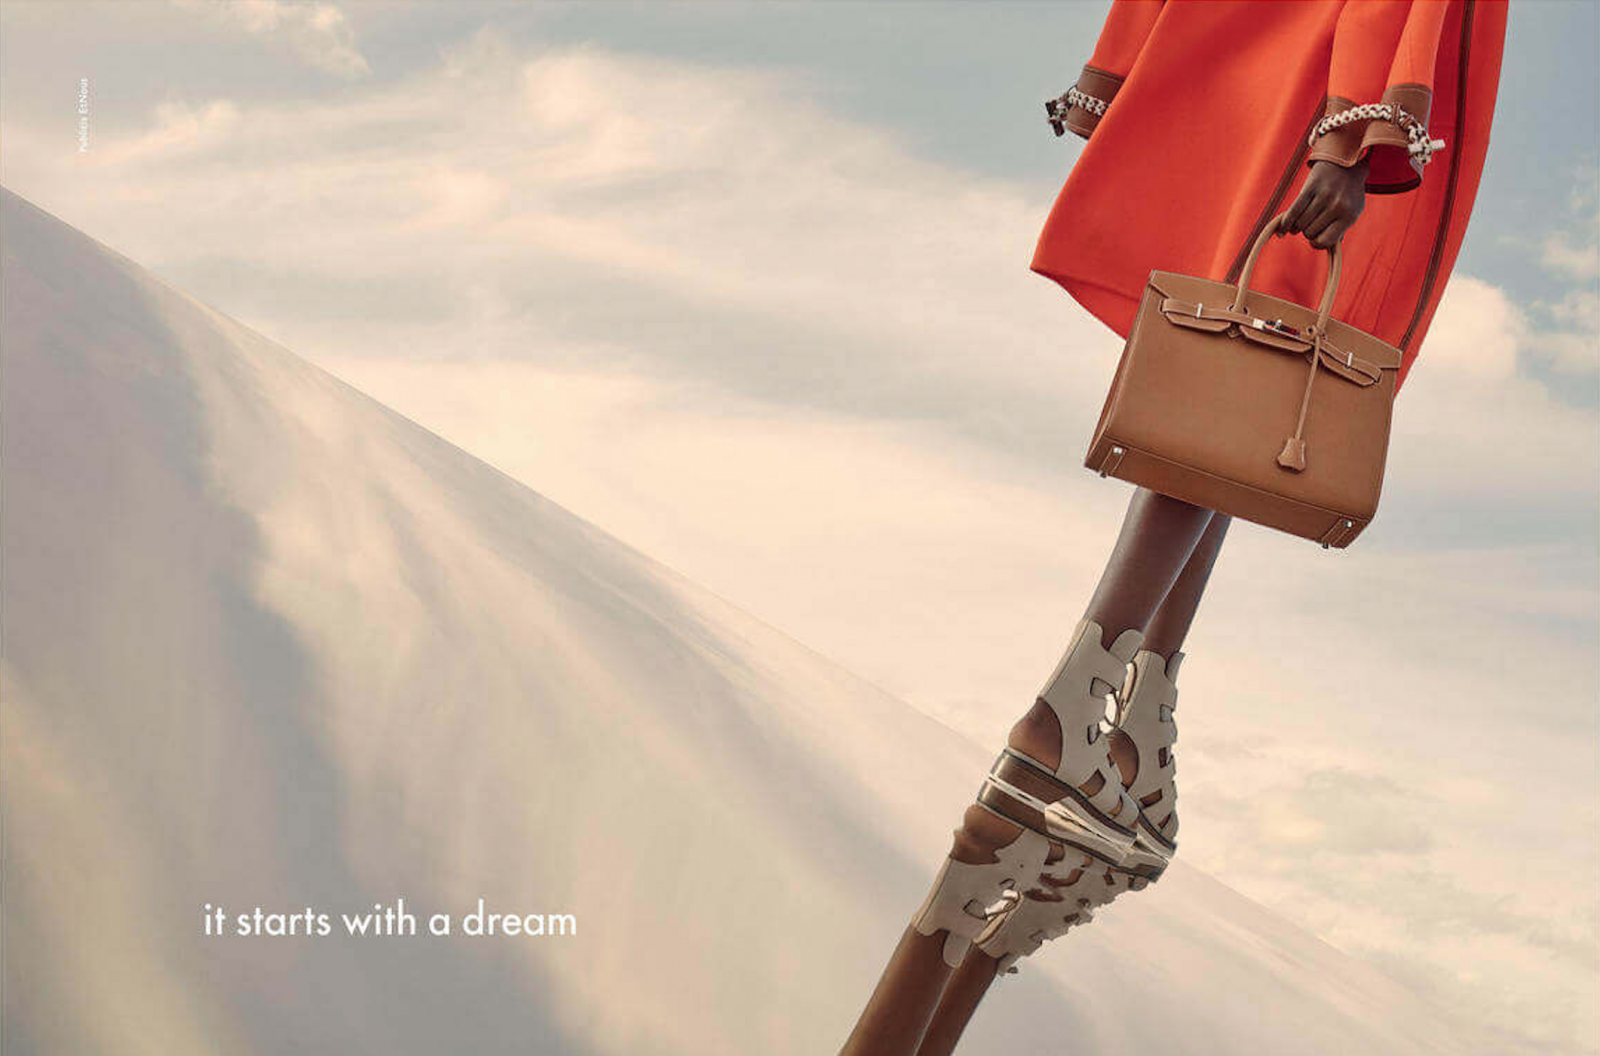 Hermes Ad Campaigns Through the Ages